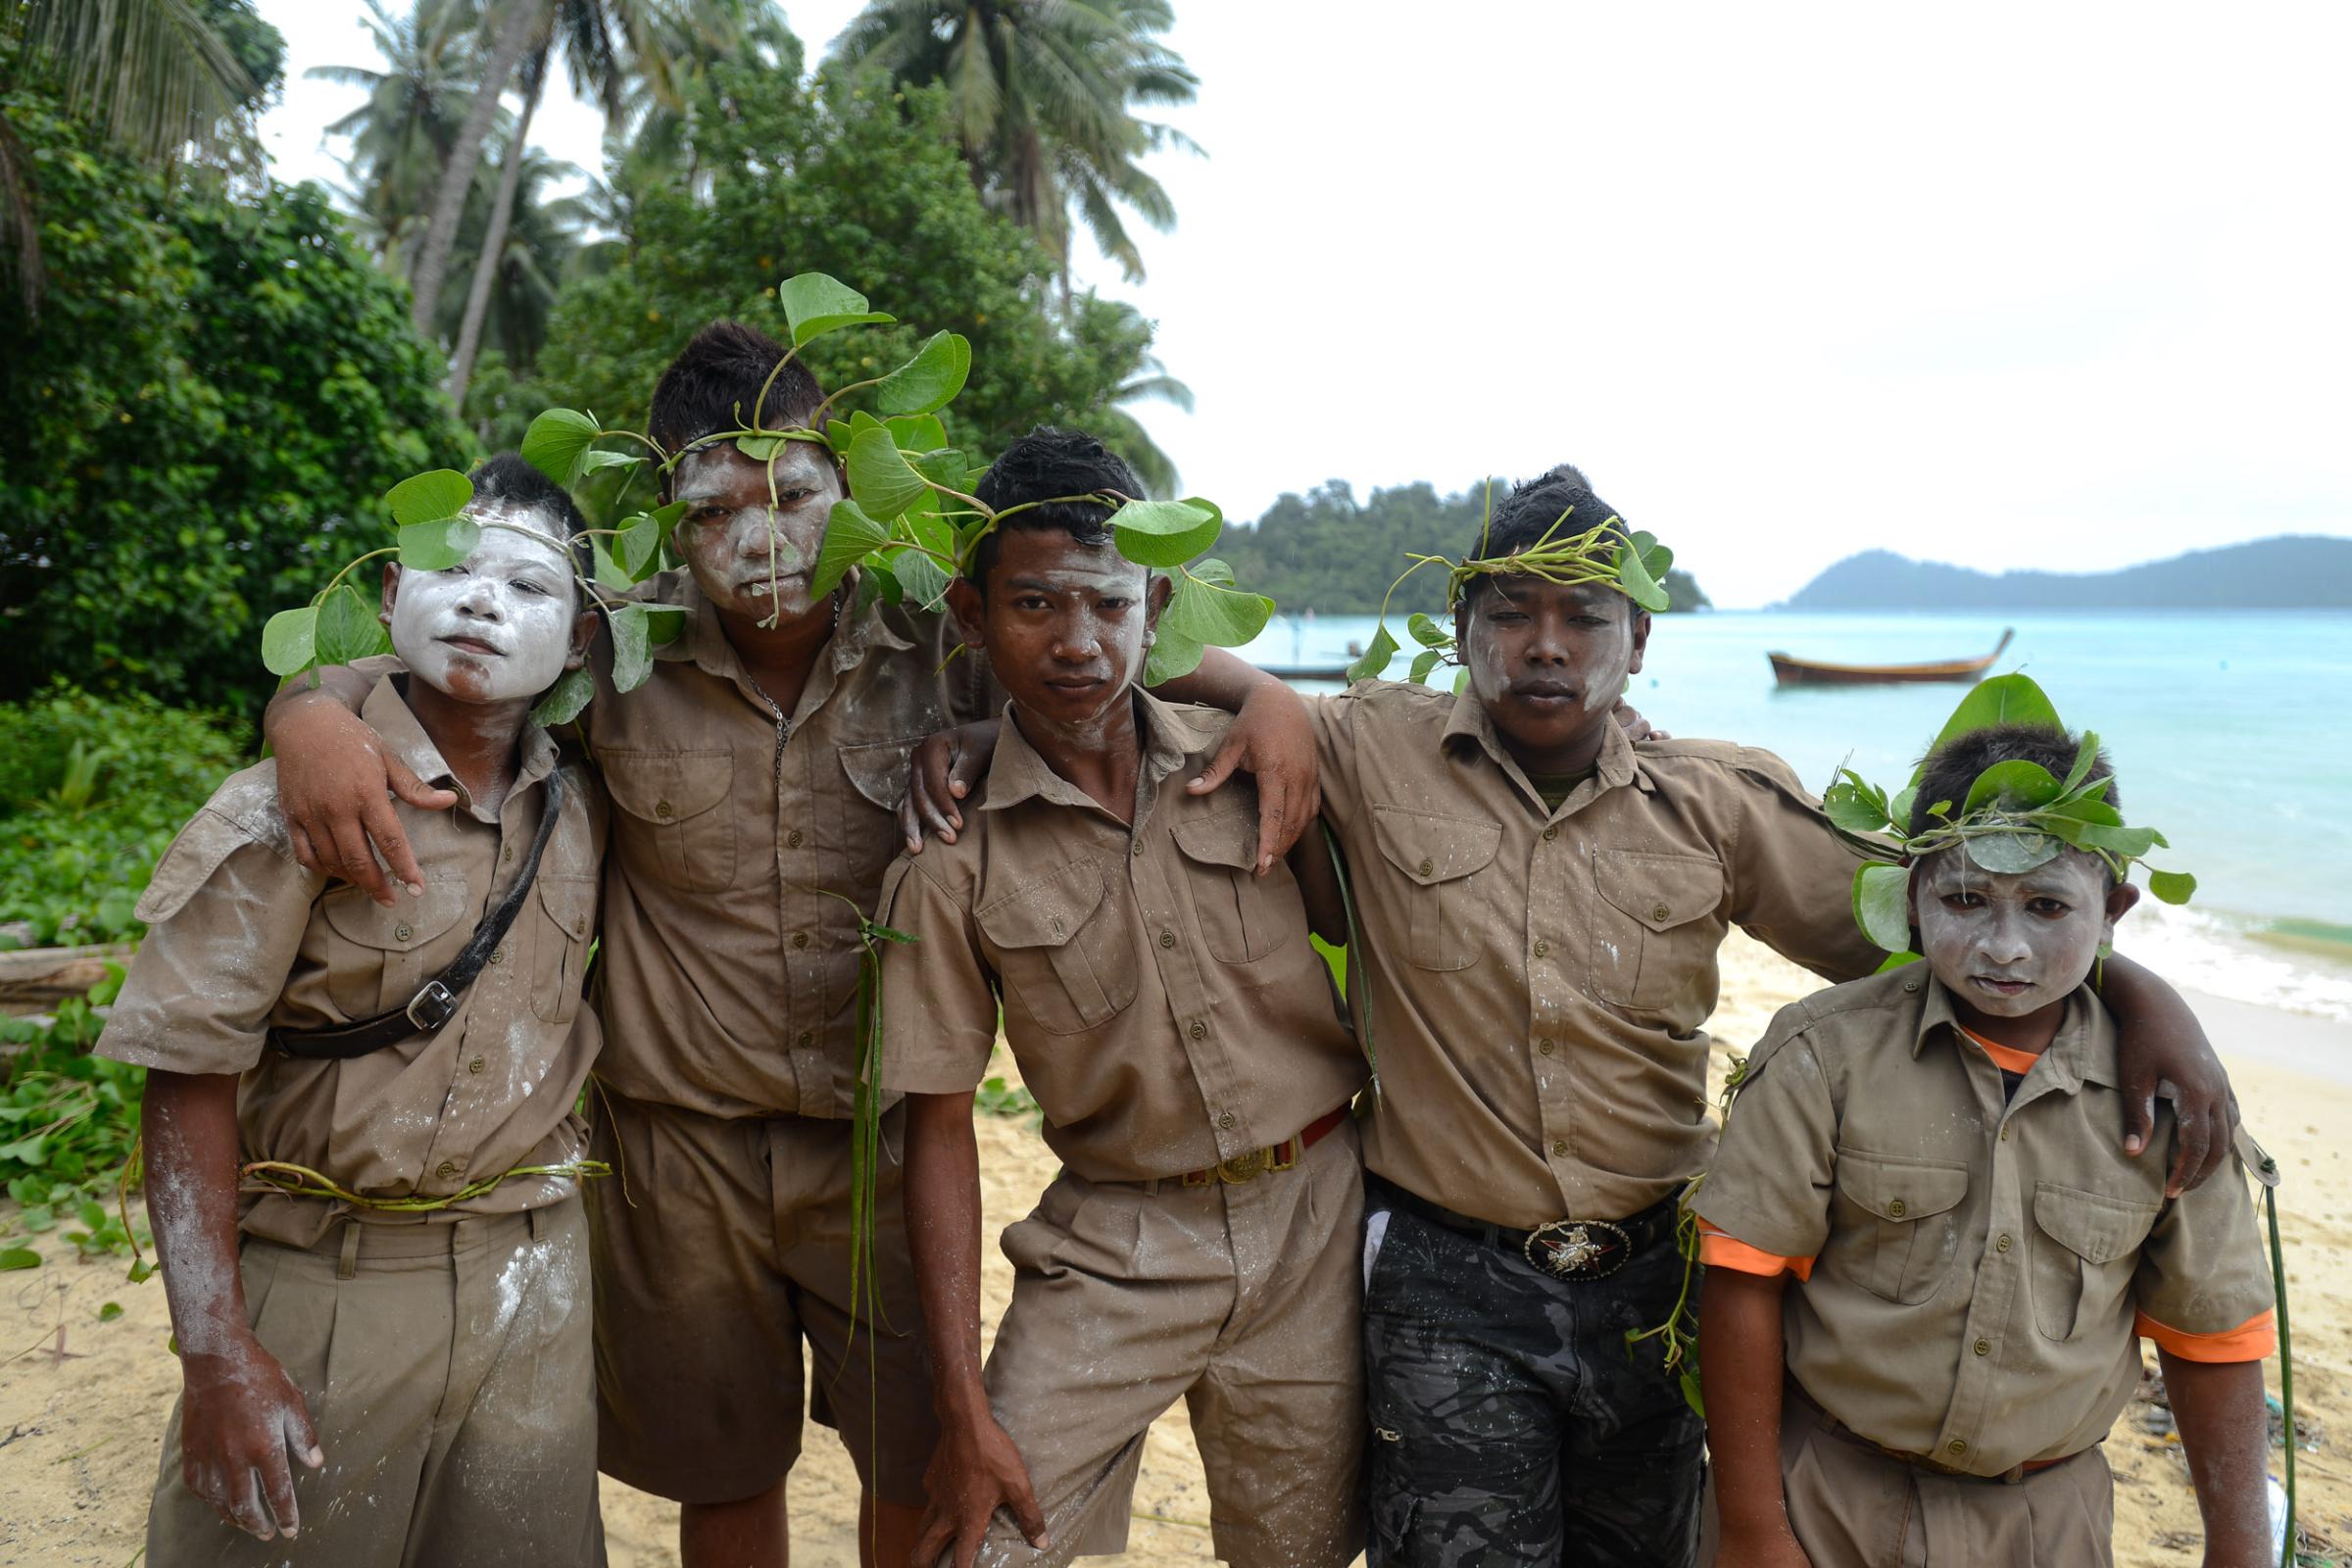 Lipe Island - The young generation adorns themselves with plants on...